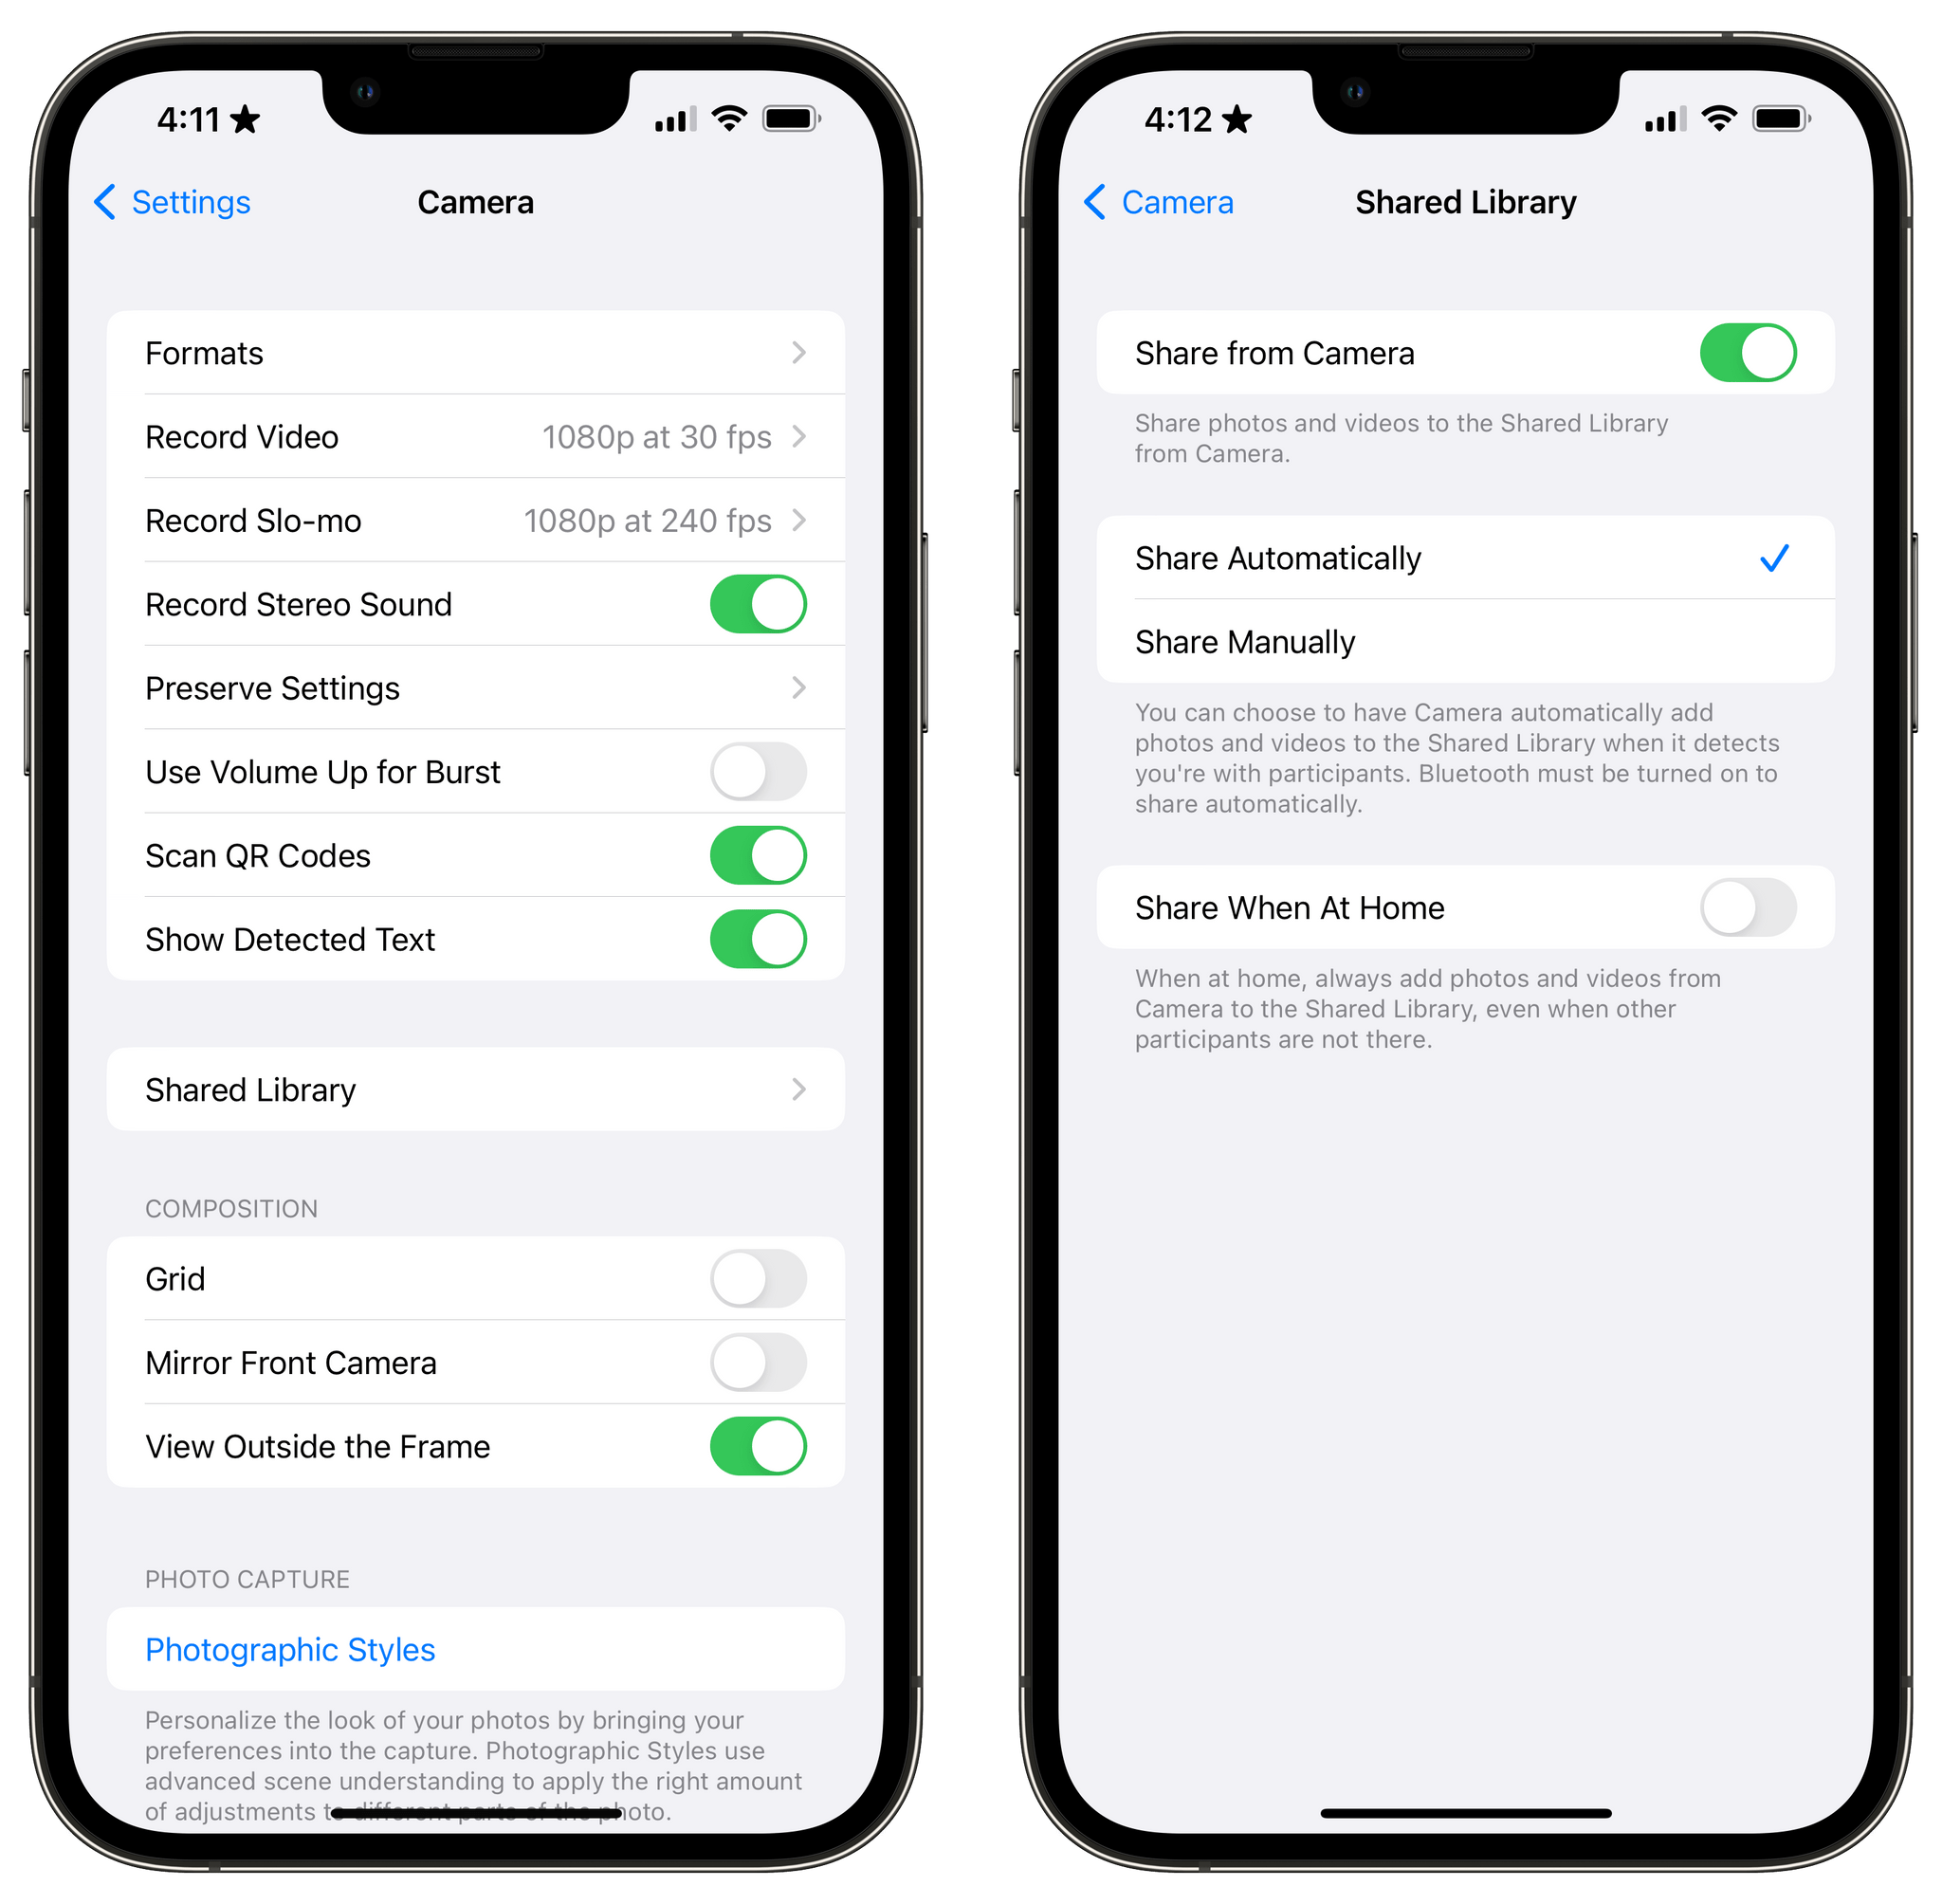 The Camera app's settings let you control how images are shared.